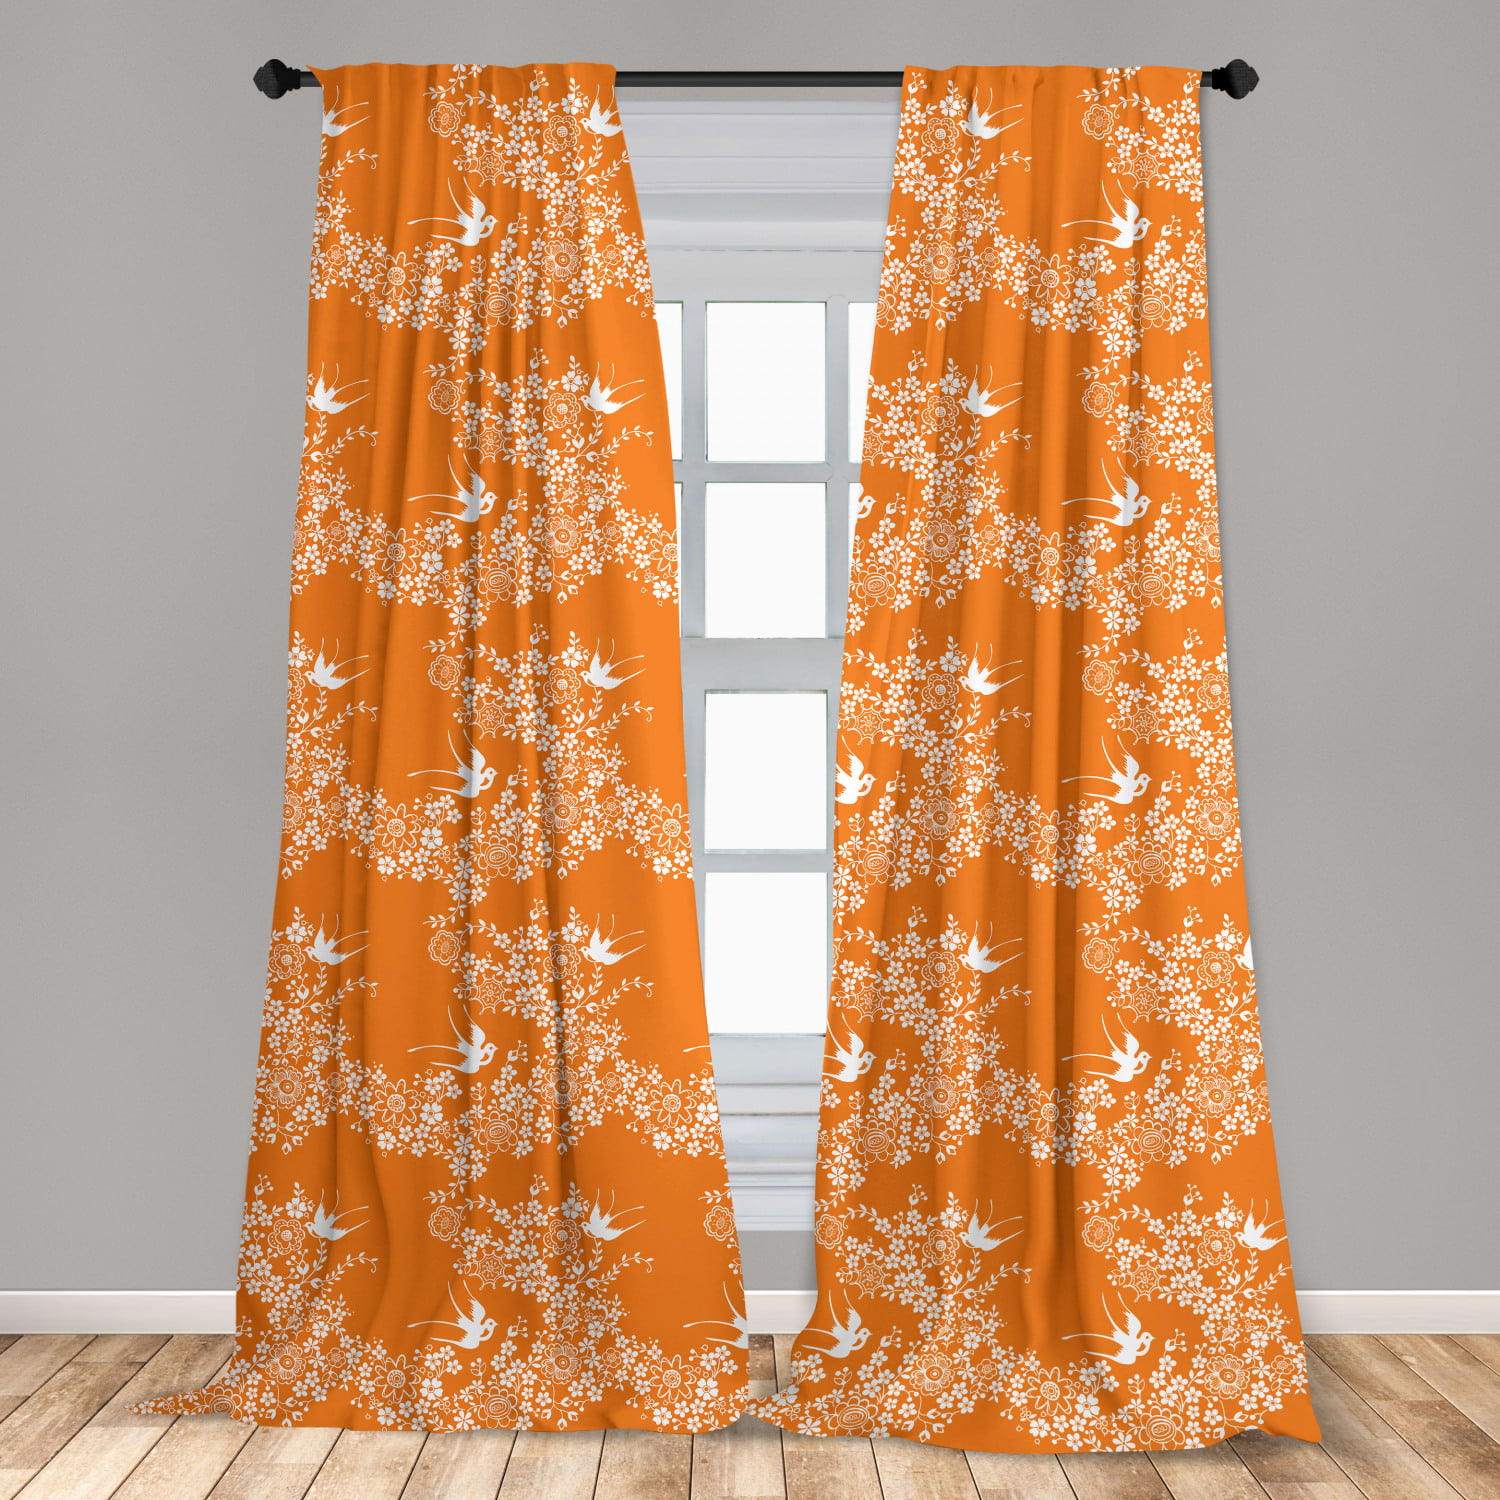 Window Curtain Printed Fall Colors in Japan Wellmira for Living Room Soft Fabric 